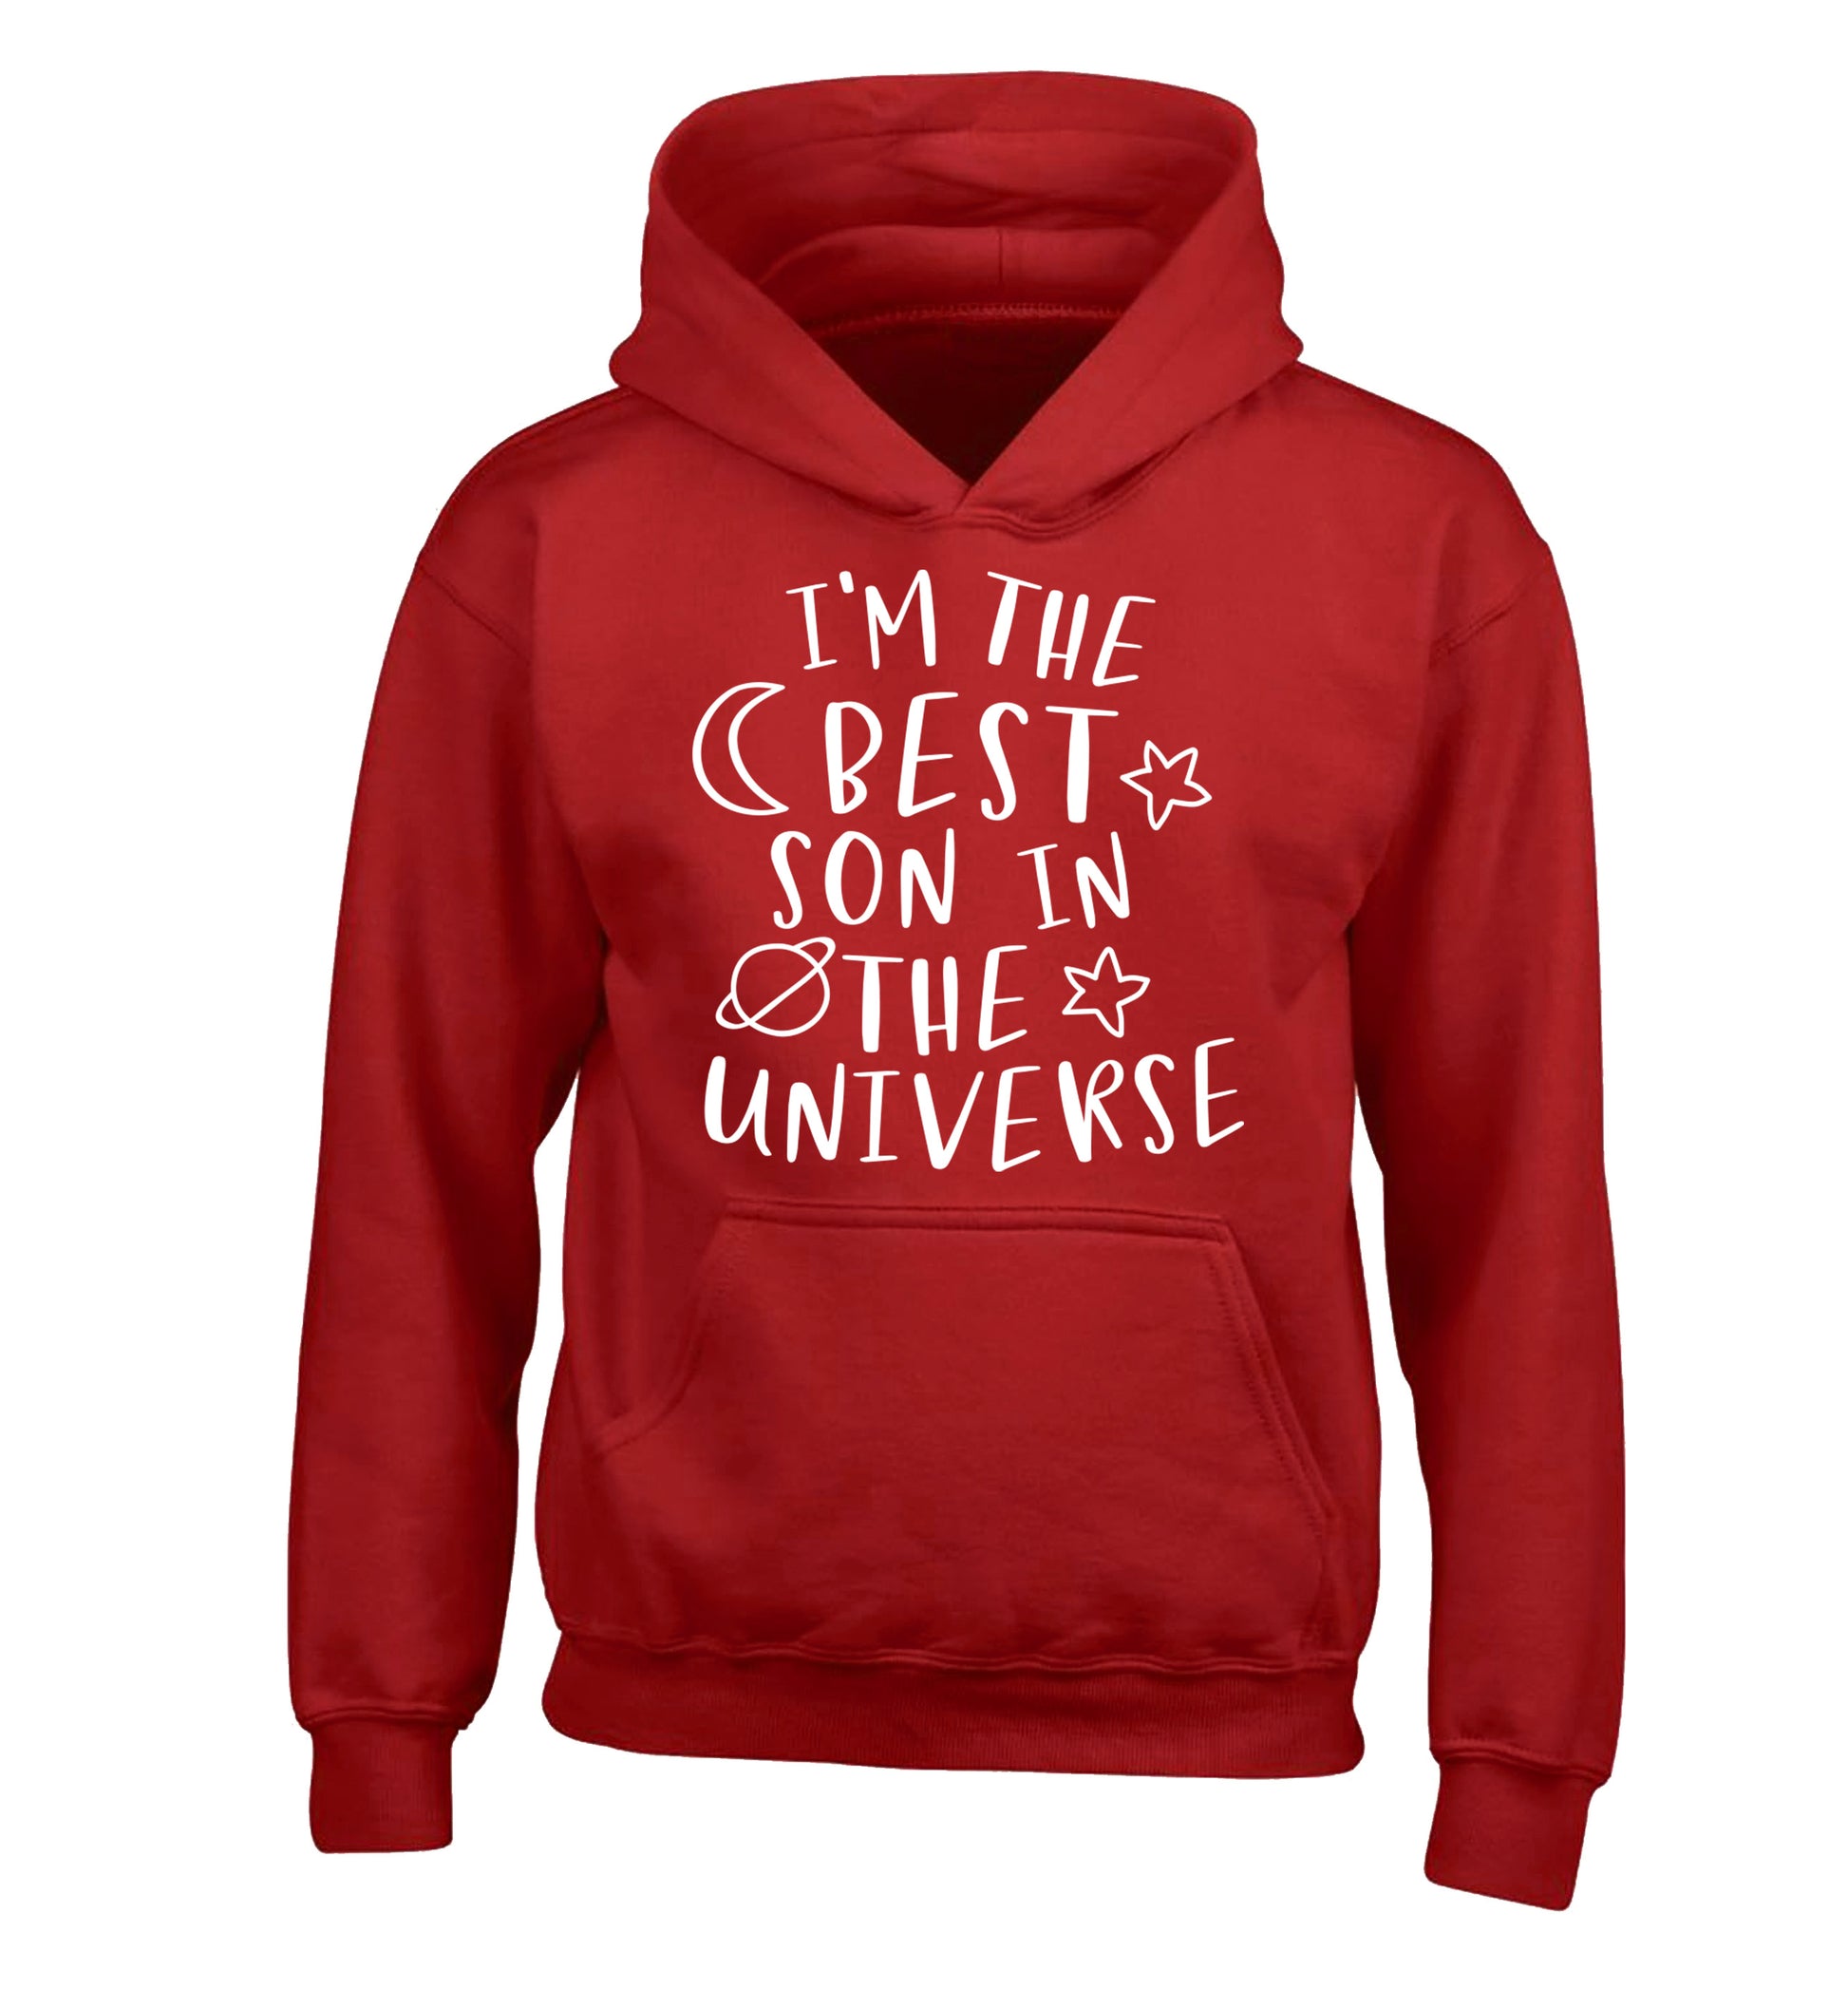 I'm the best son in the universe children's red hoodie 12-13 Years